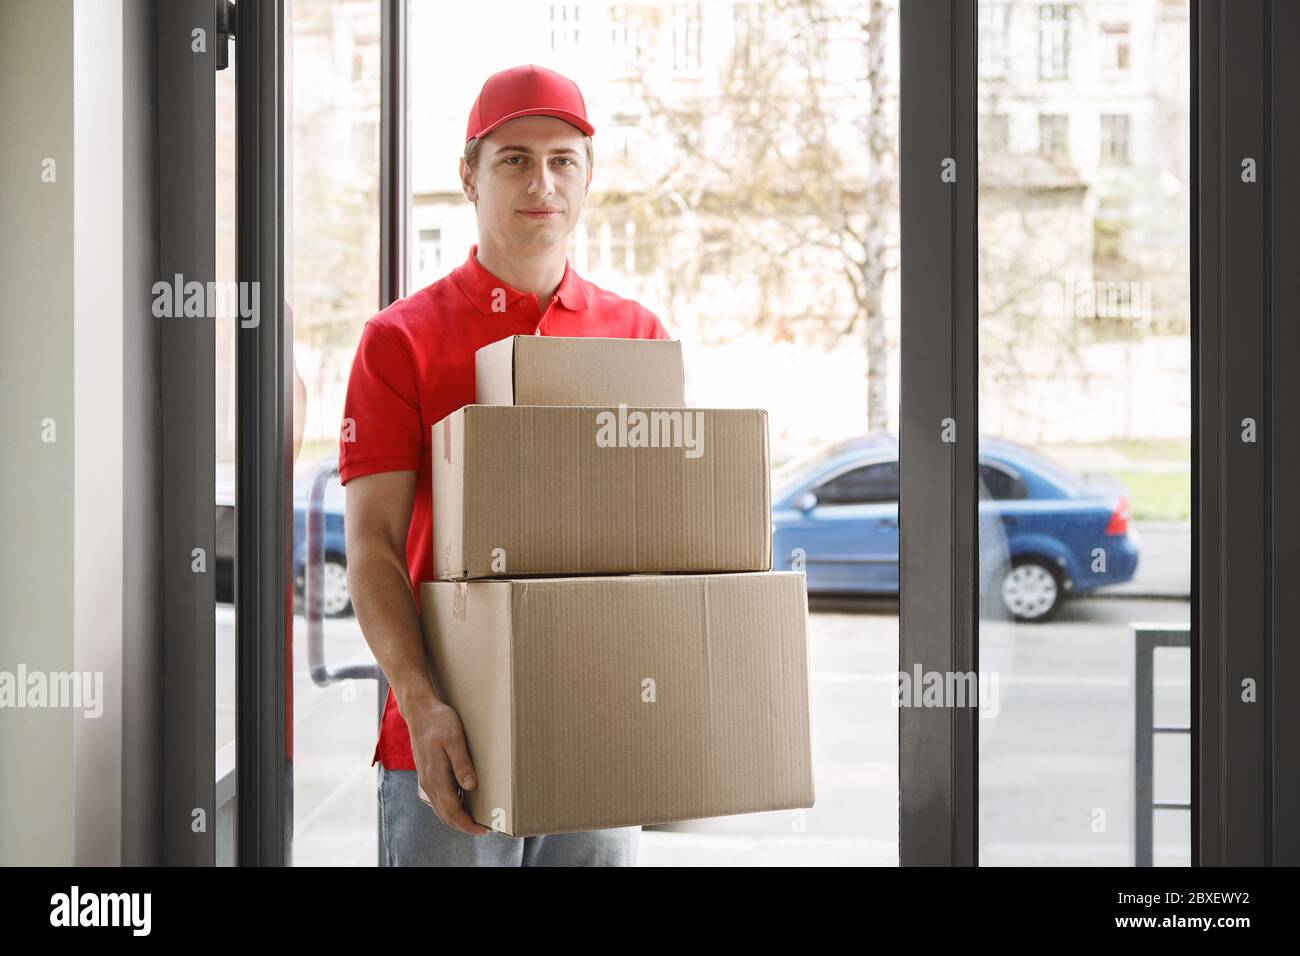 Online shopping without leaving home and fast delivery. Courier in uniform holds cardboard boxes Stock Photo